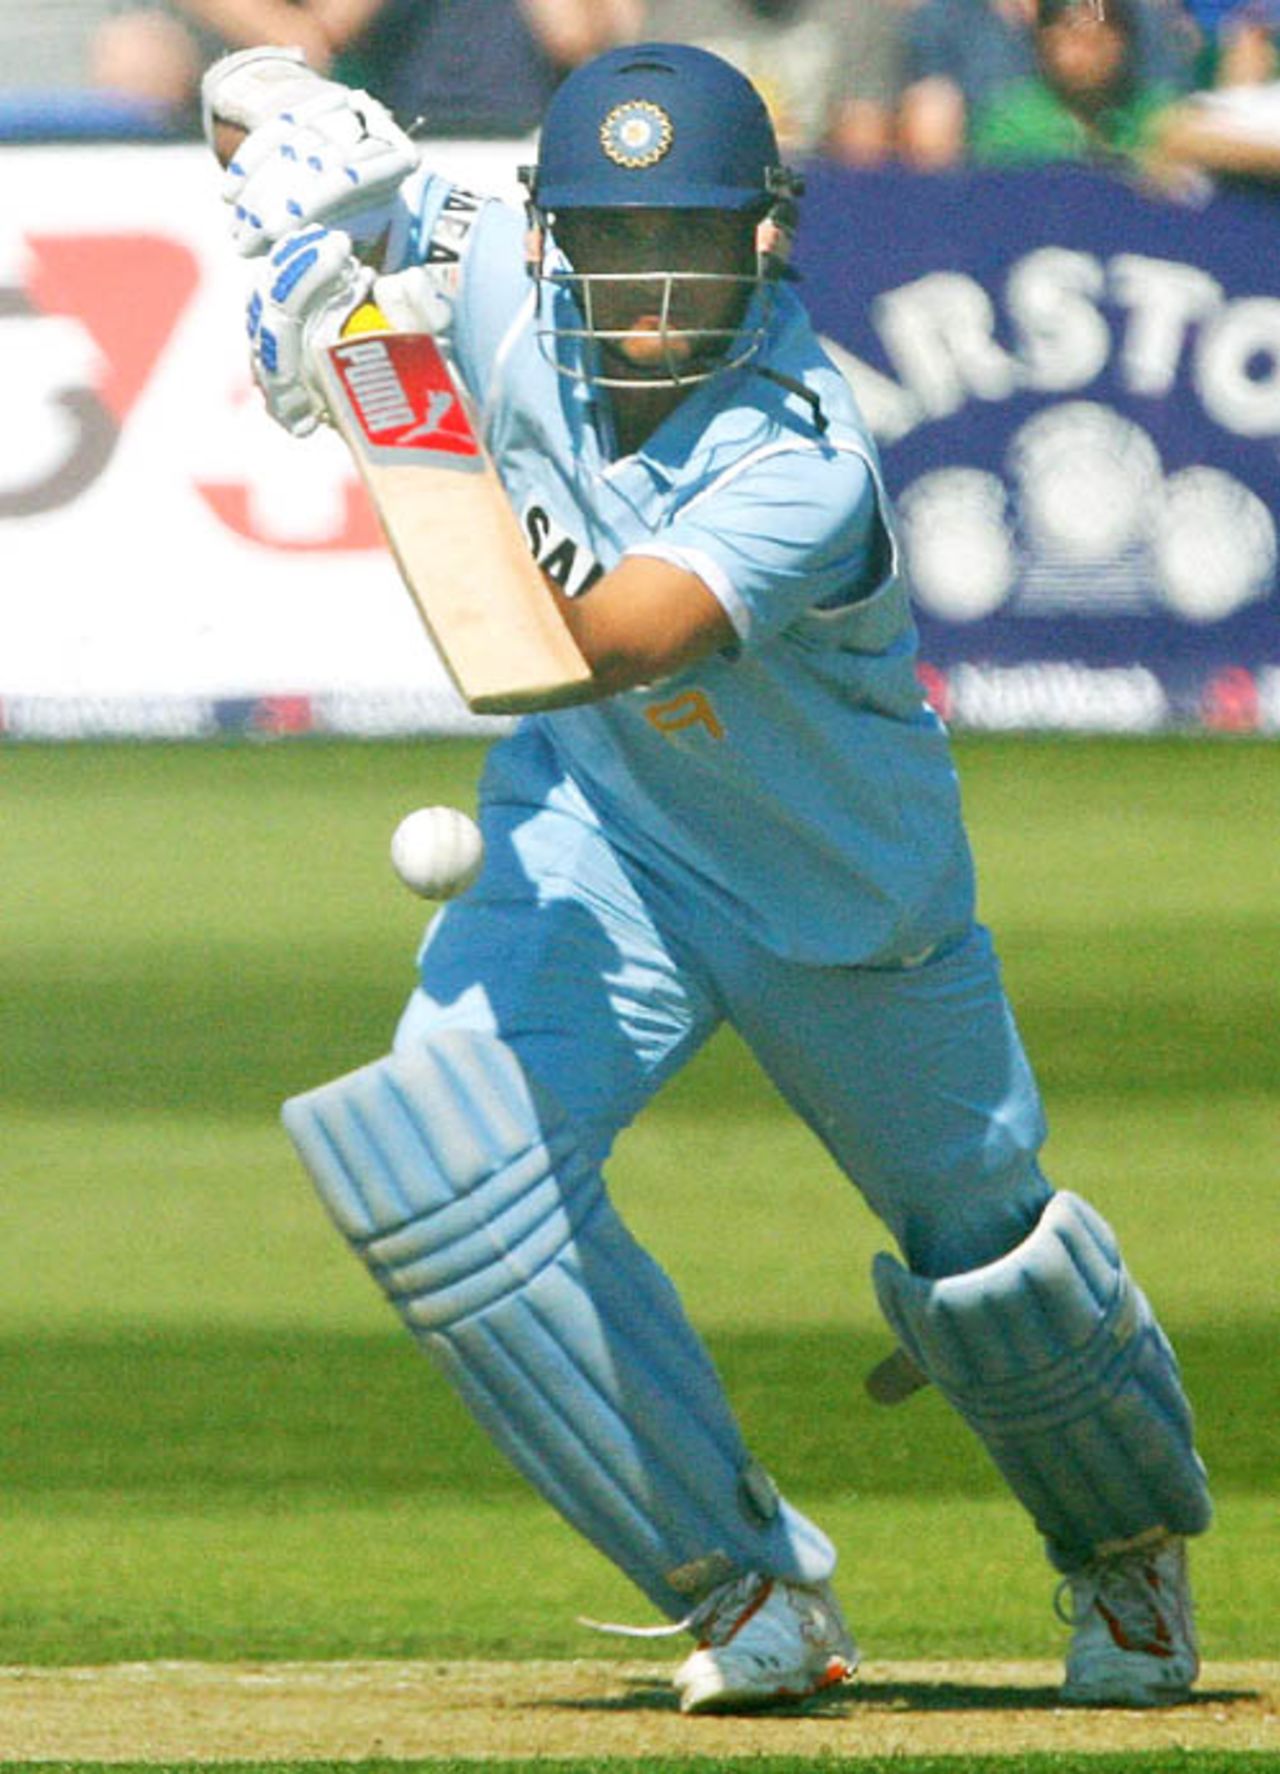 Sourav Ganguly caresses one through the off side, England v India, 2nd ODI, Bristol, August 24, 2007